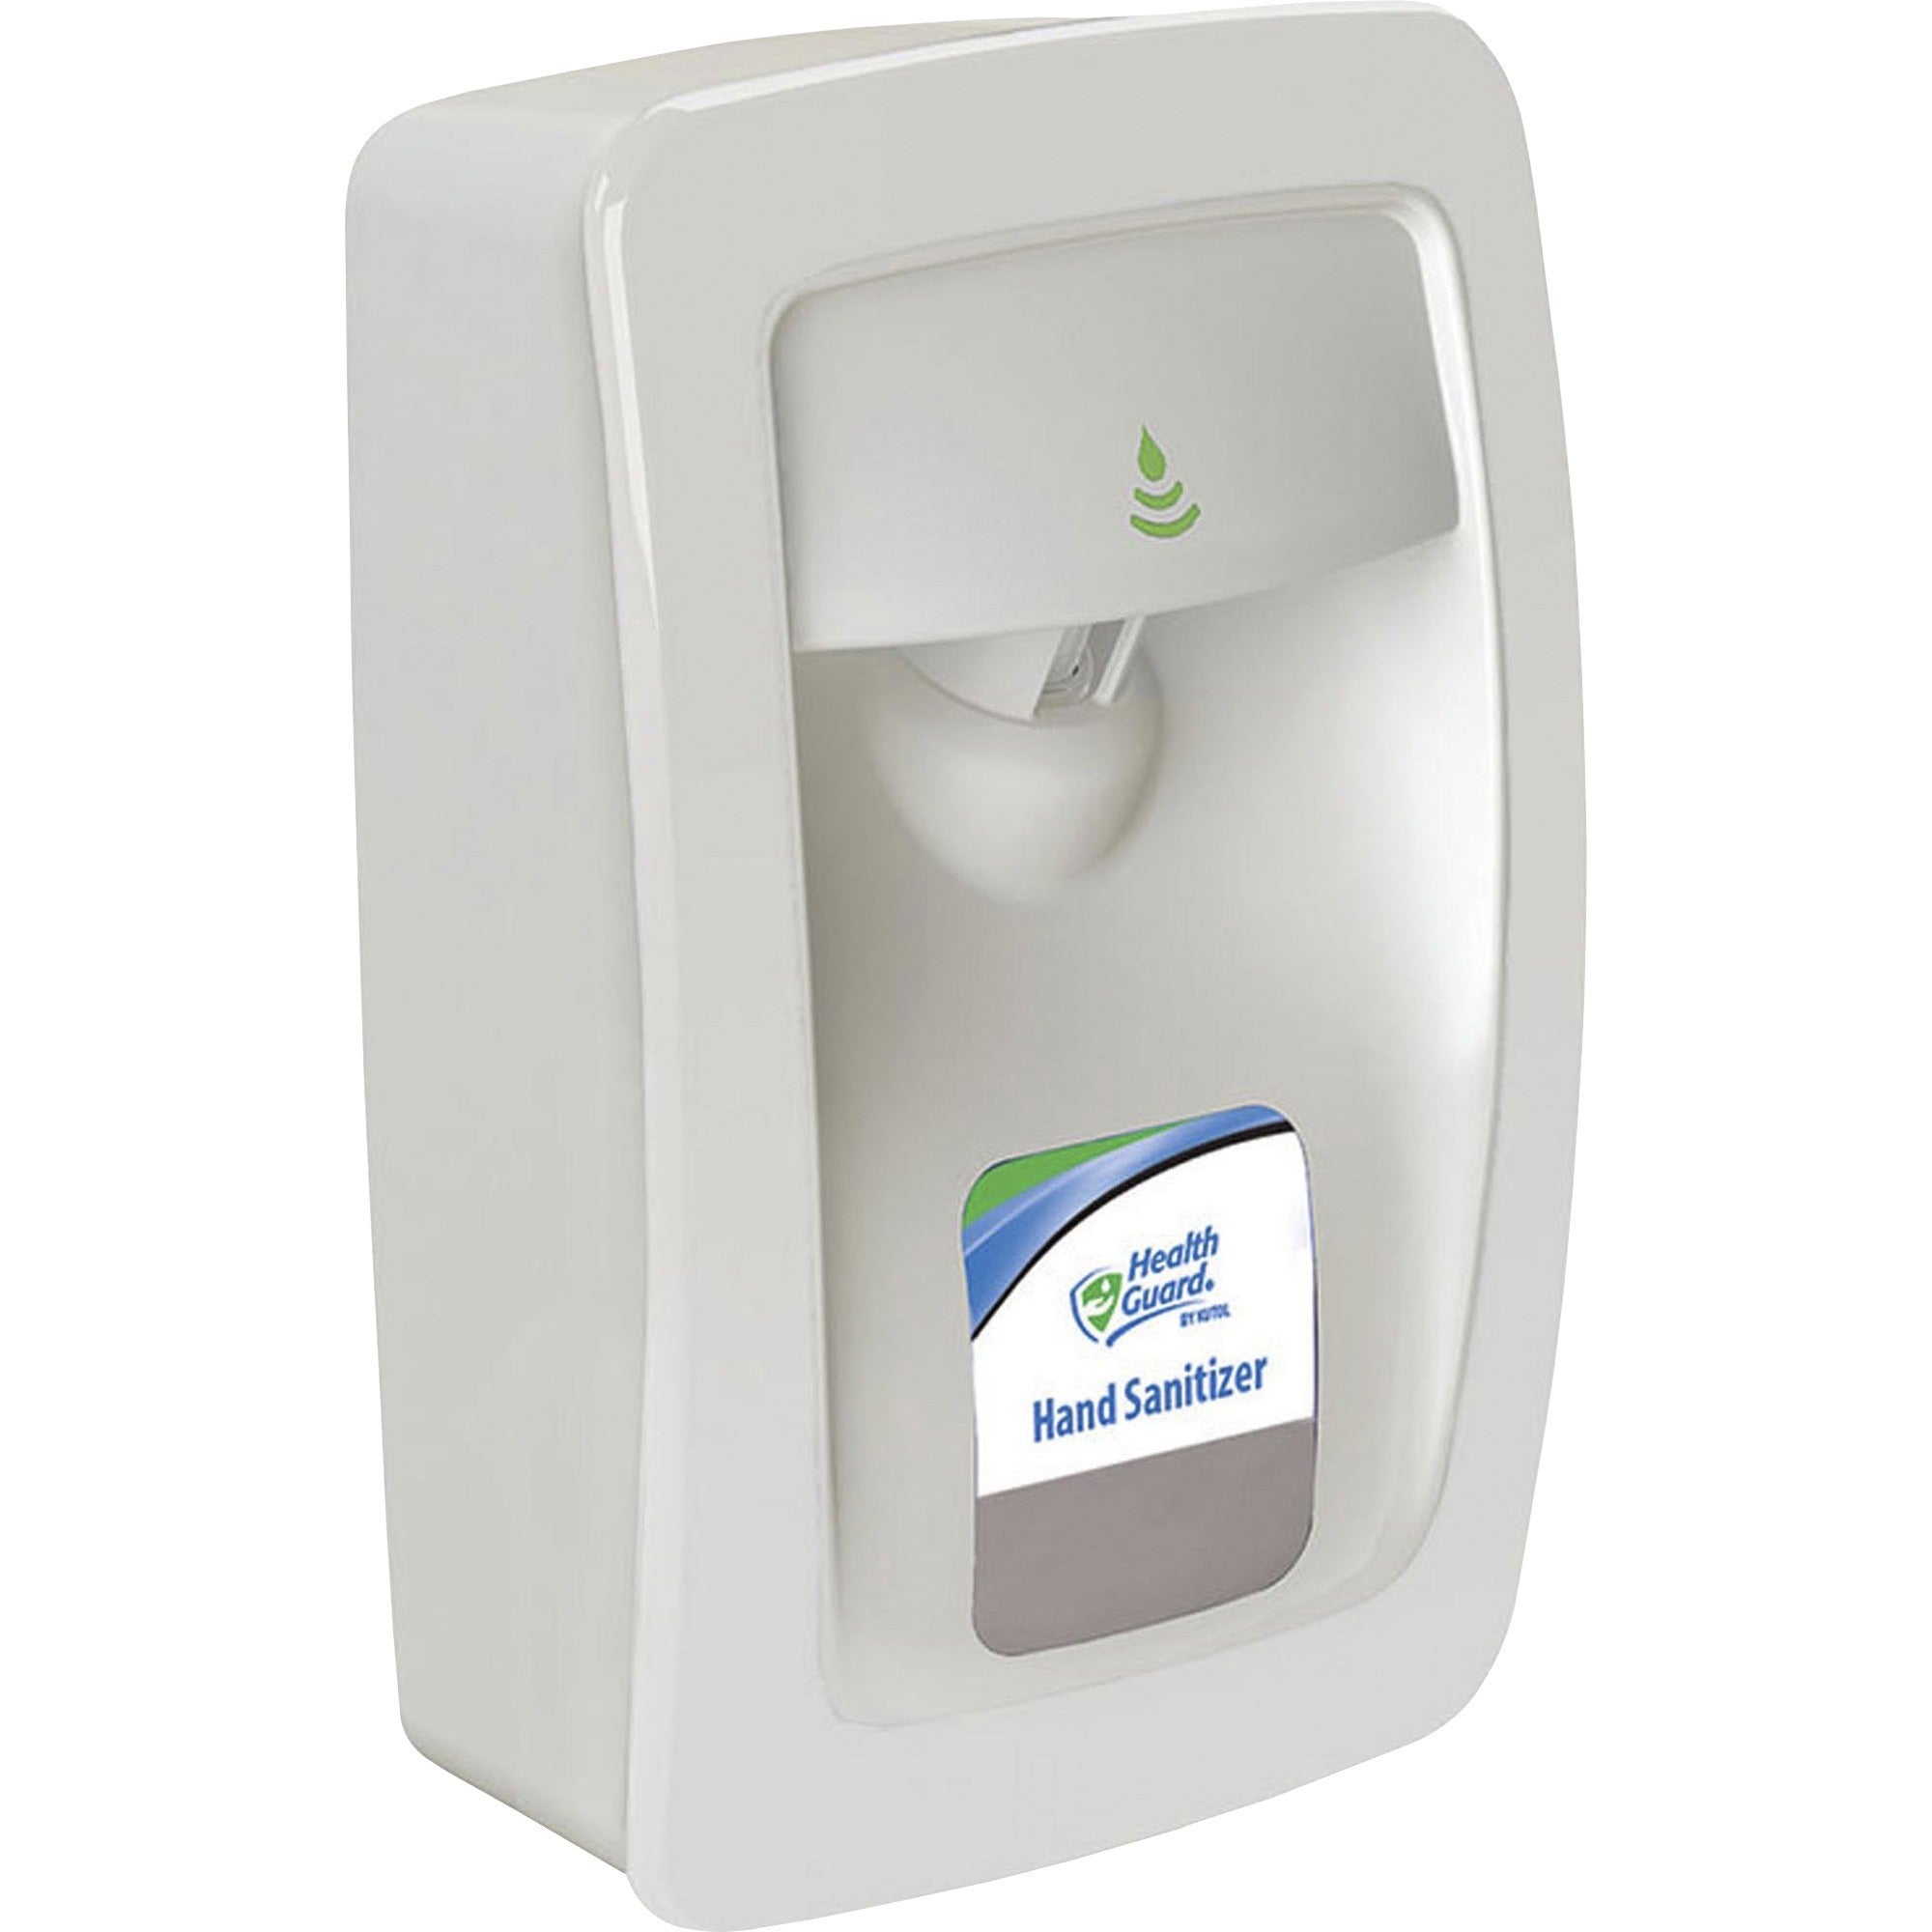 health-guard-designer-series-no-touch-dispenser-automatic-106-quart-capacity-support-4-x-c-battery-touch-free-key-lock-refillable-white-1each_kutns011wh33 - 2